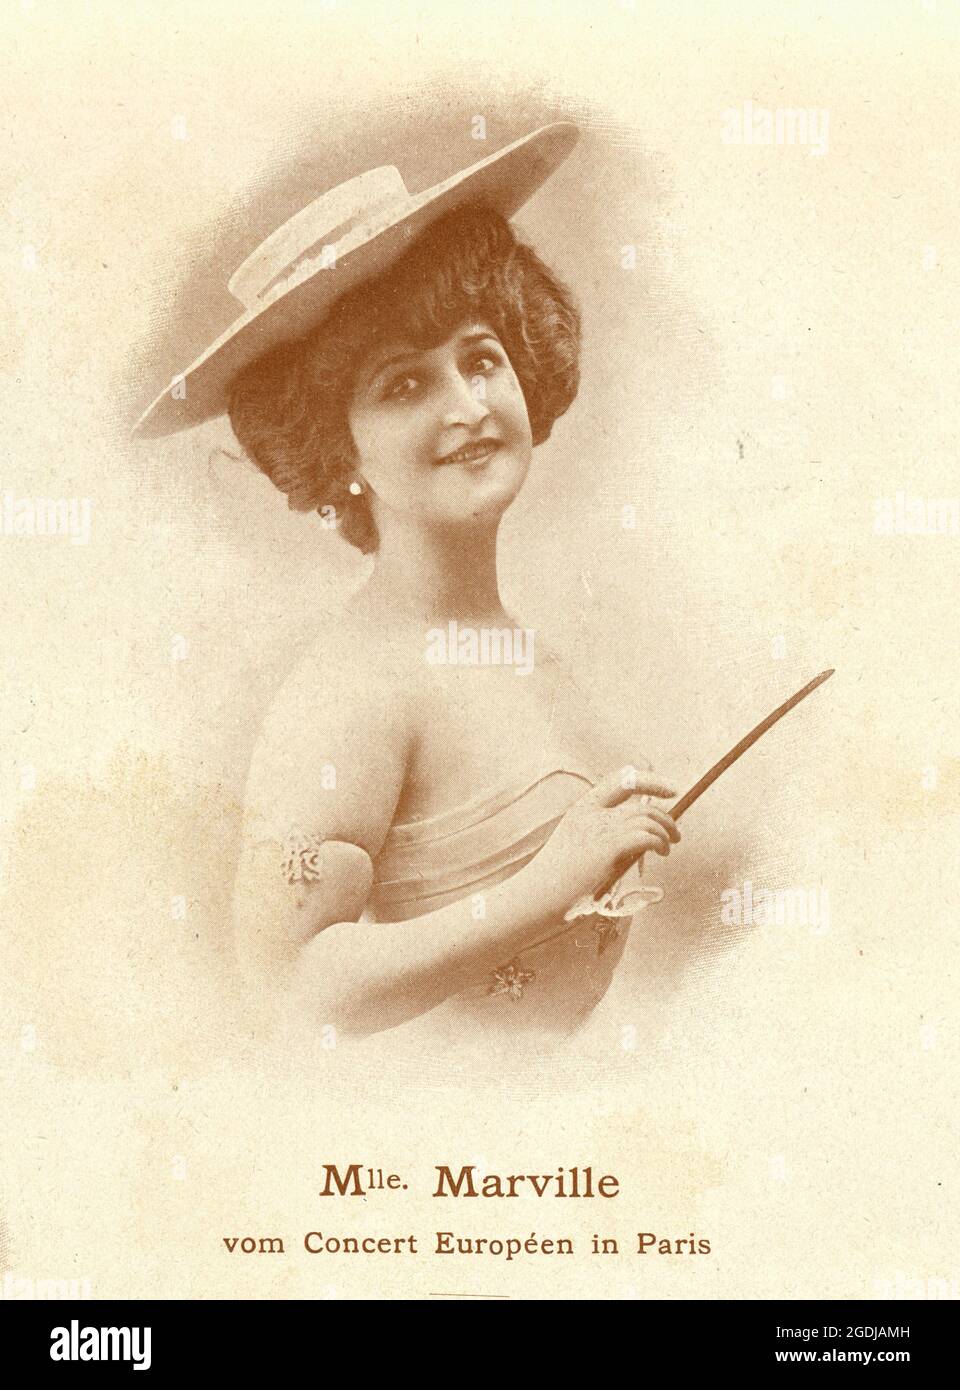 Marie Marville a music hall artist and French actress at the Revue au Concert Européen. 1902 Stock Photo